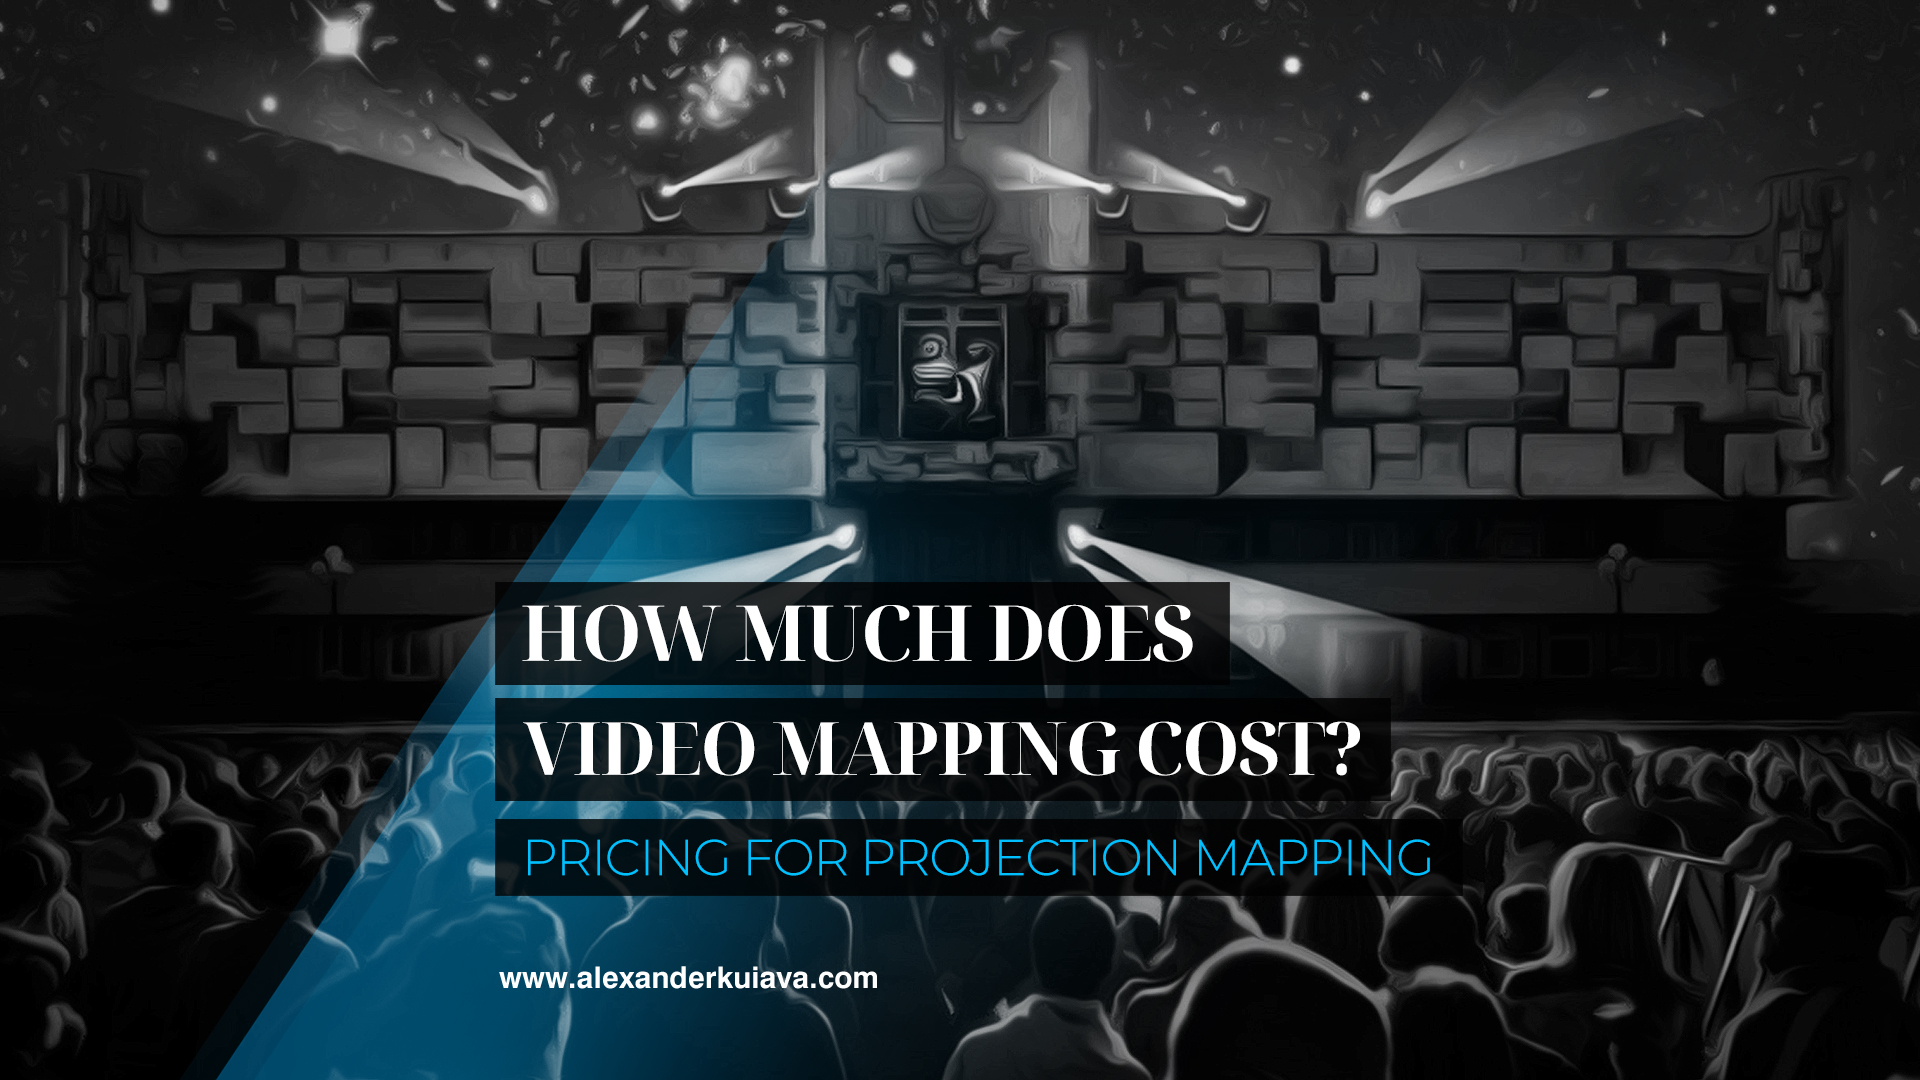 How much does video mapping cost?